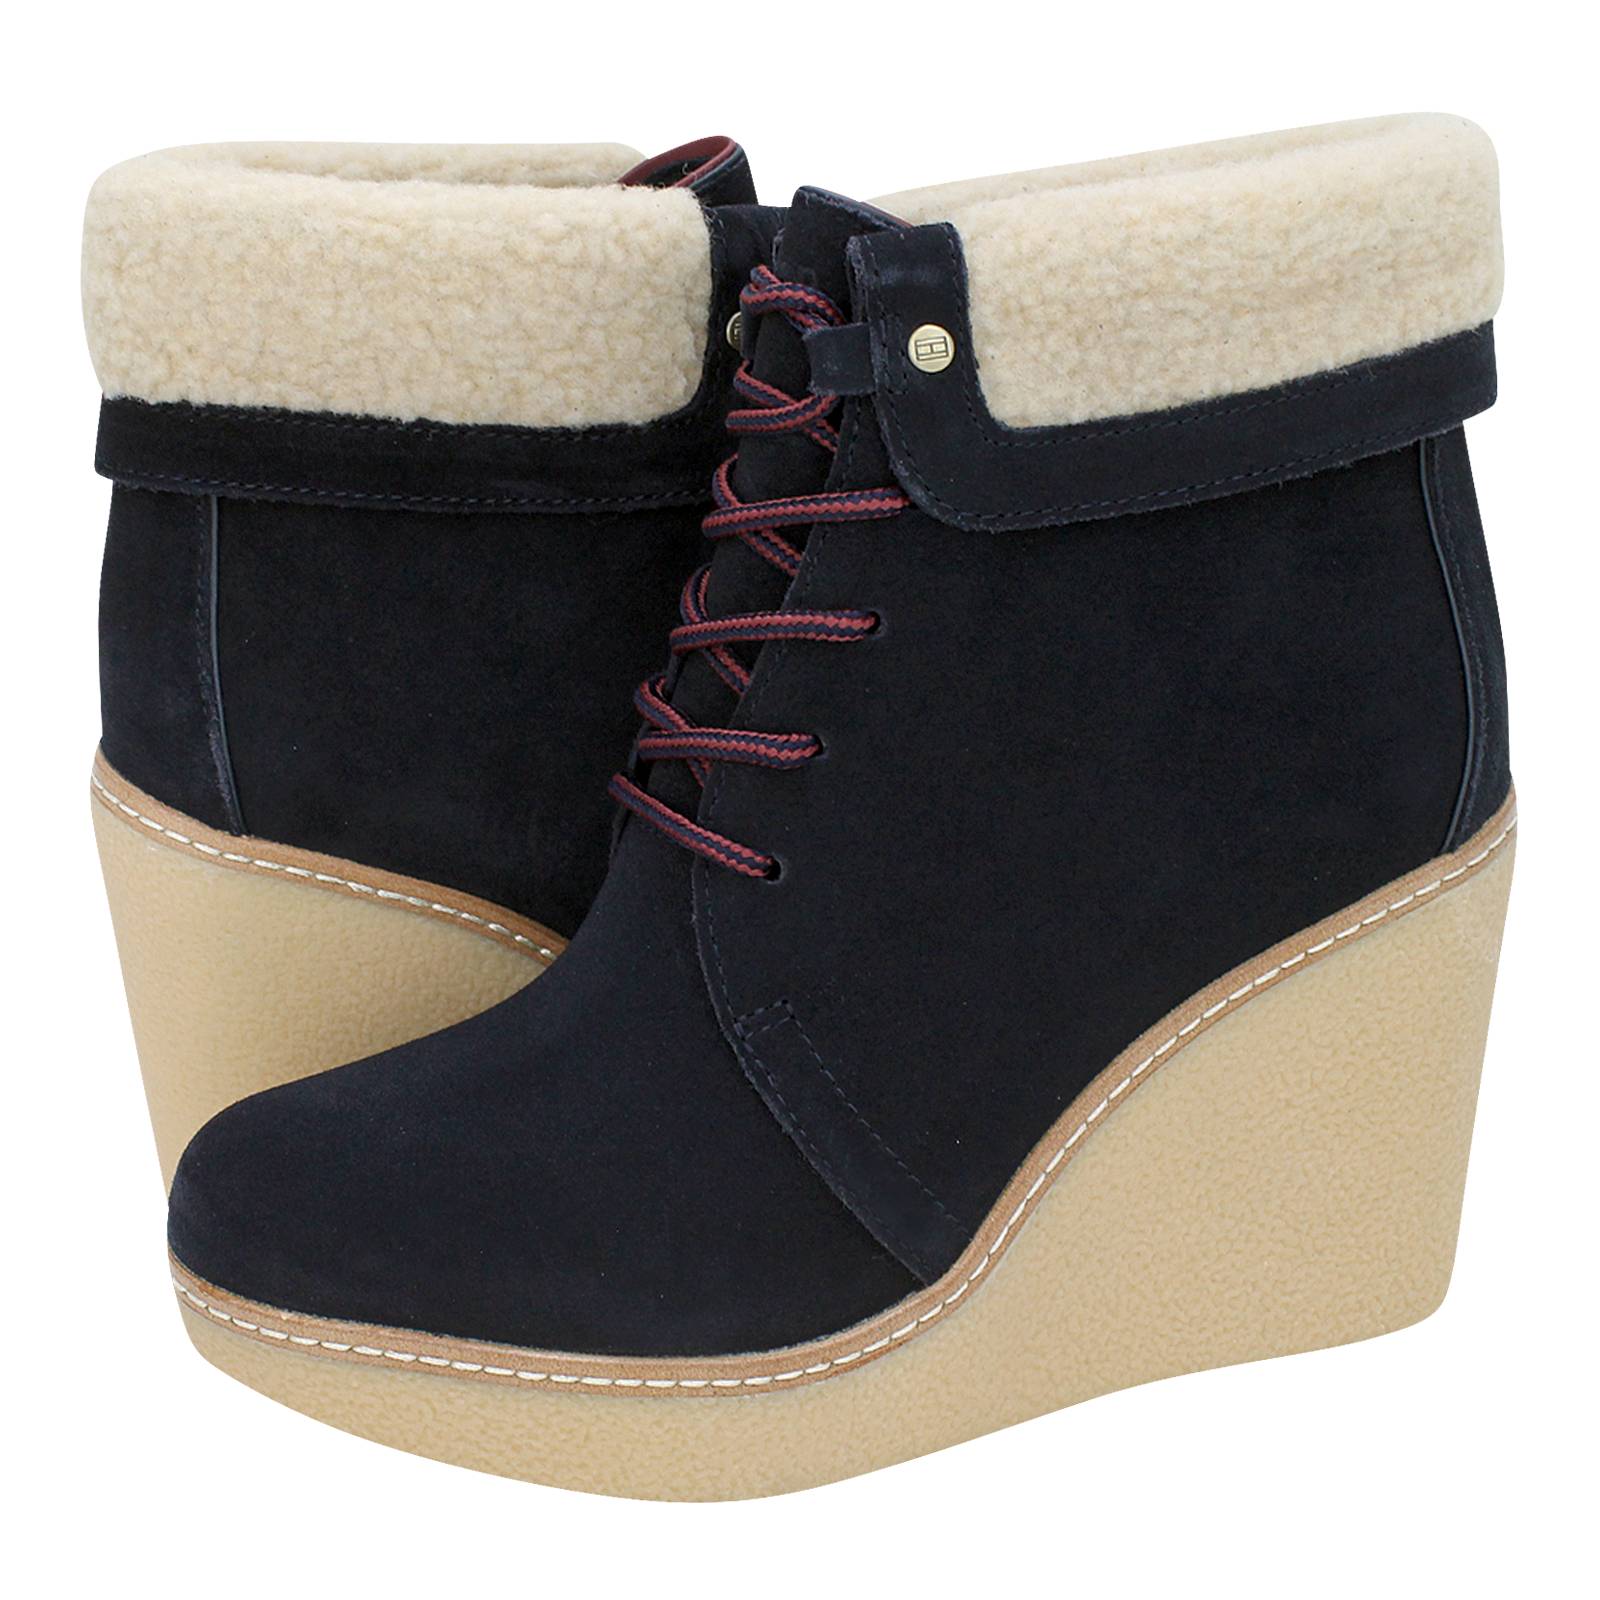 1B - Tommy Hilfiger Women's low made of suede and fabric - Gianna Kazakou